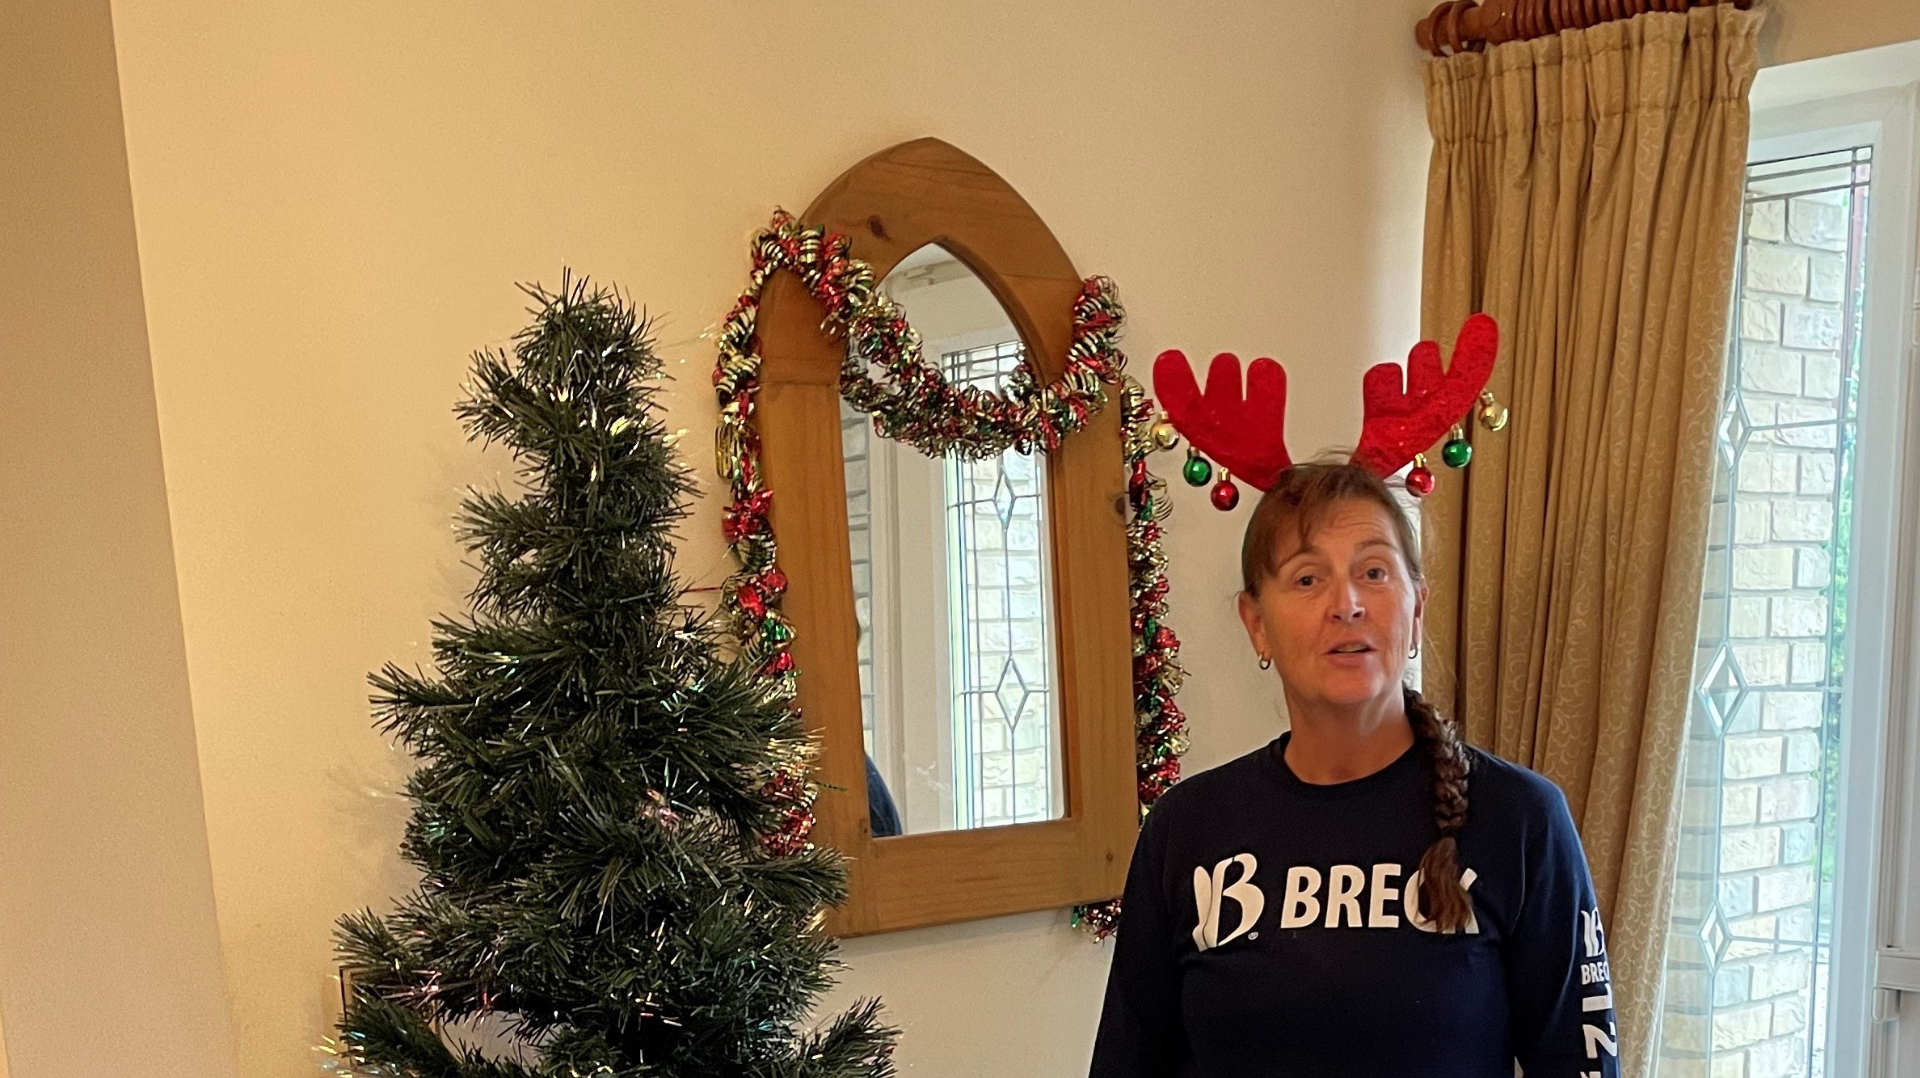 Jan standing next to her decorated Christmas tree